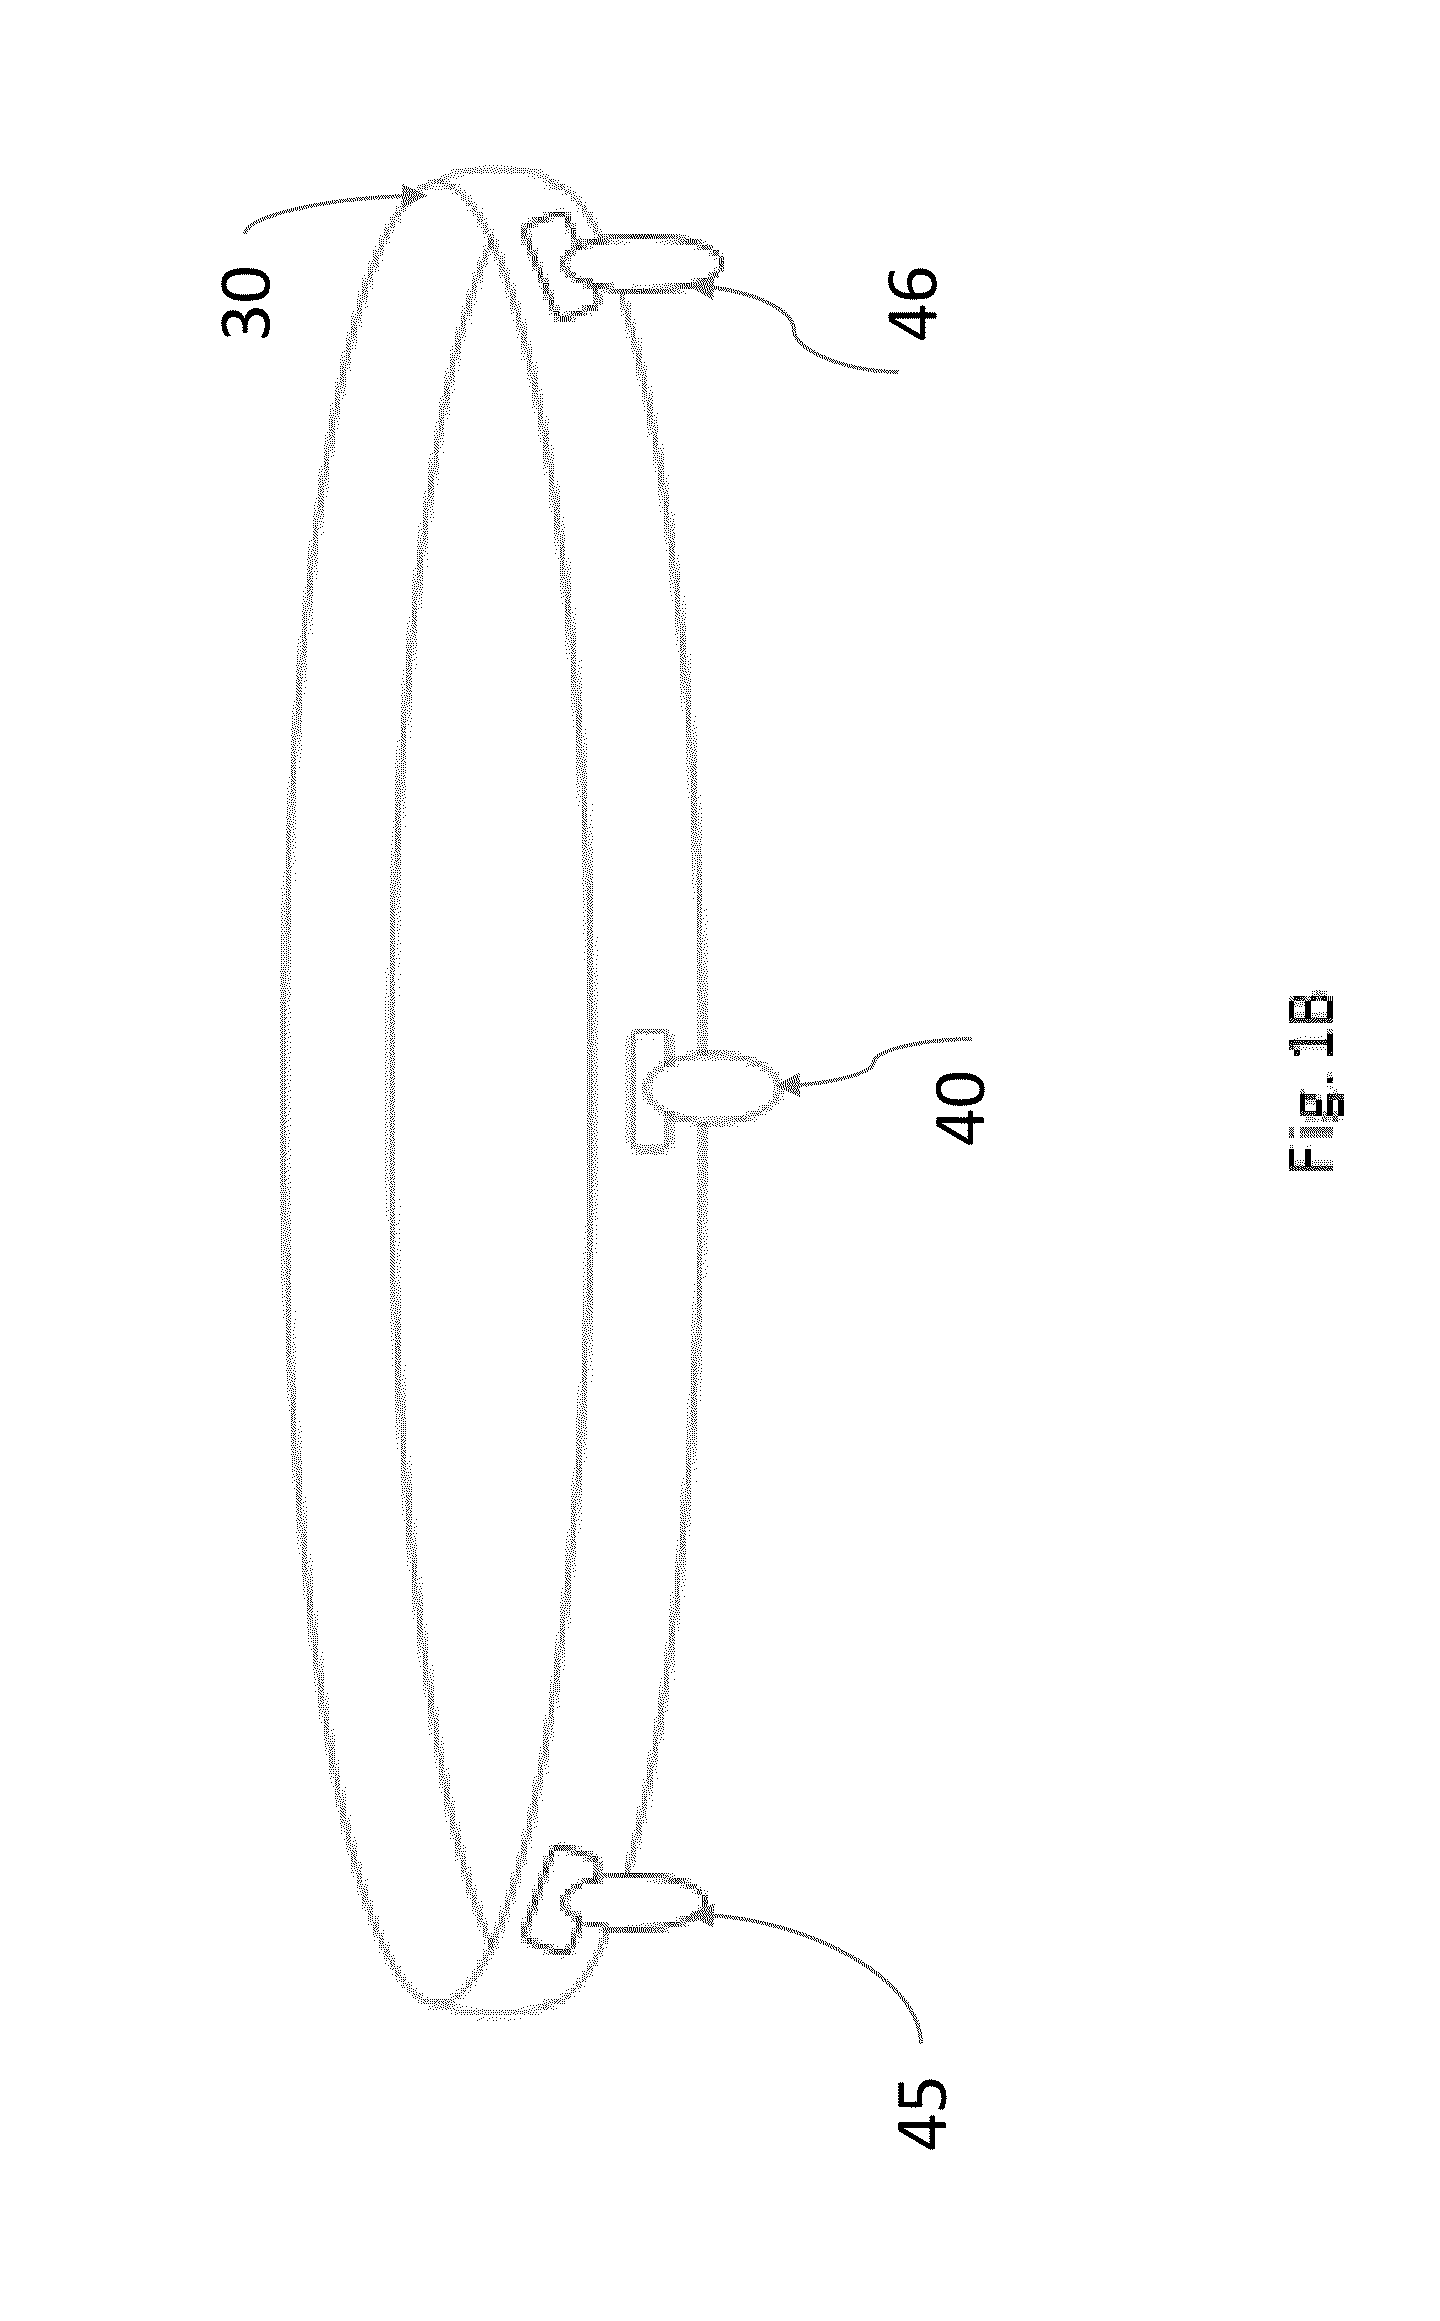 Eyeglass and medical device retainer and sensor